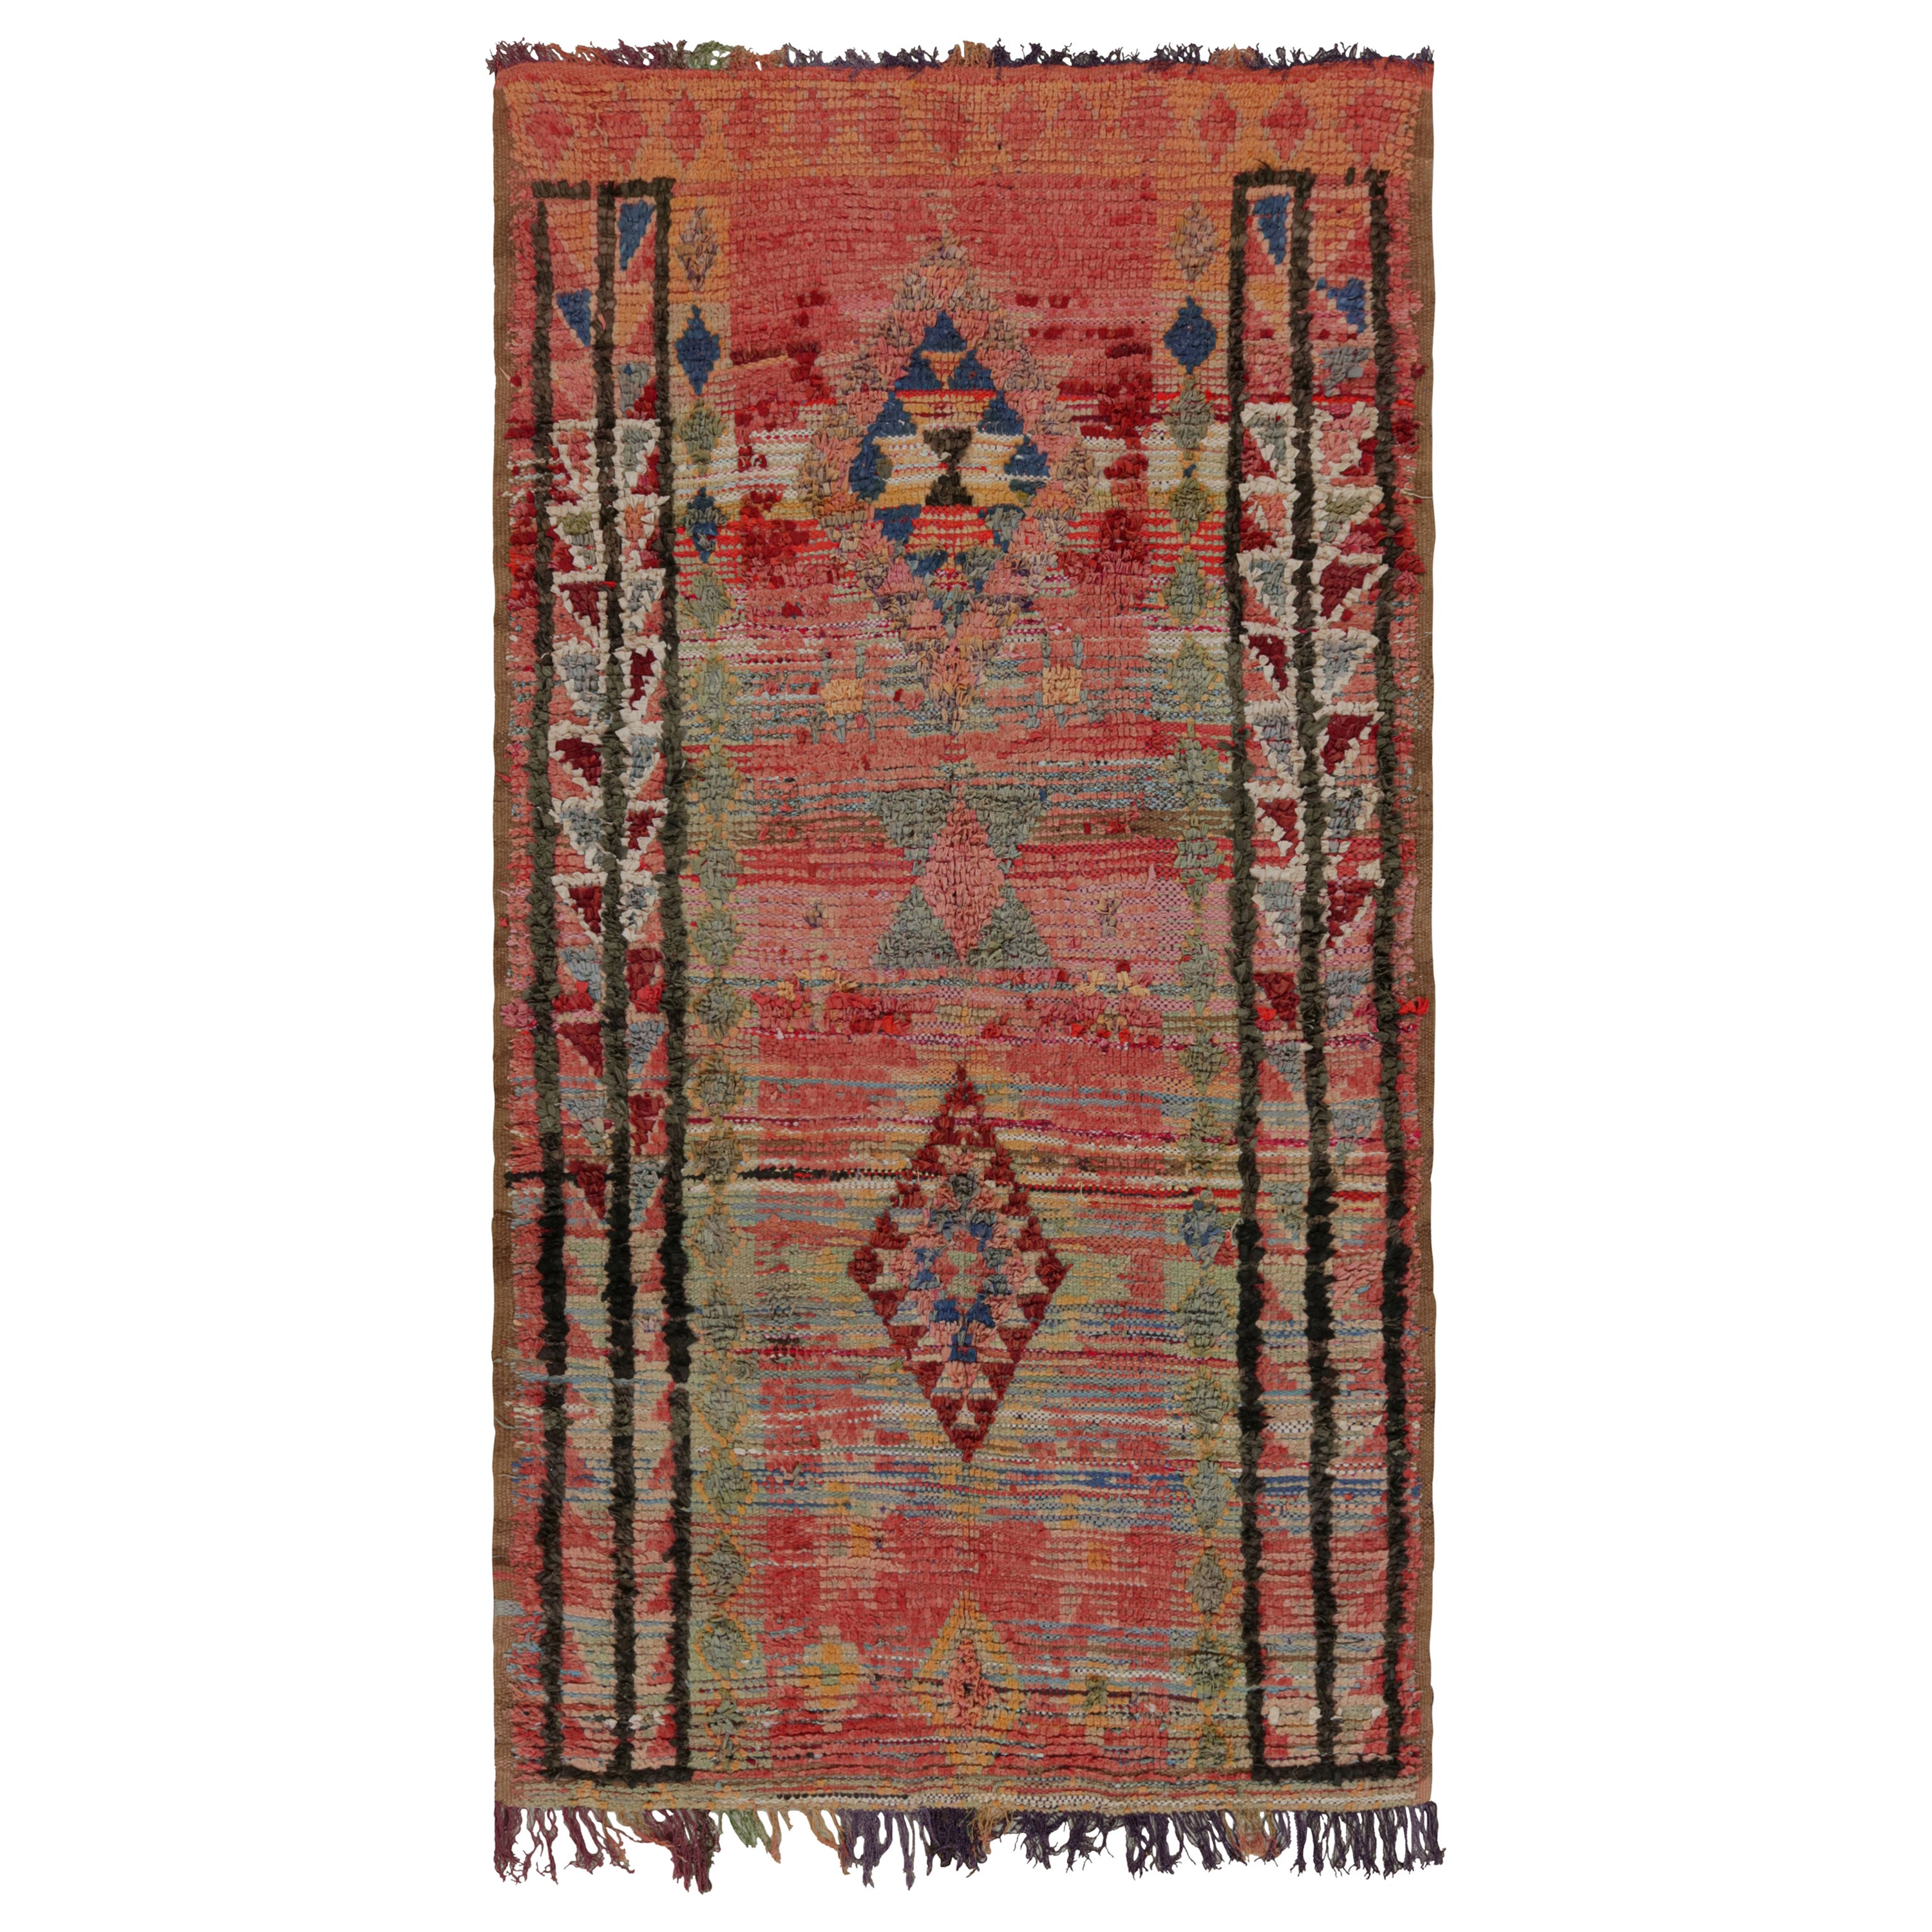 Vintage Moroccan Rug in Red with Geometric Patterns, from Rug & Kilim 